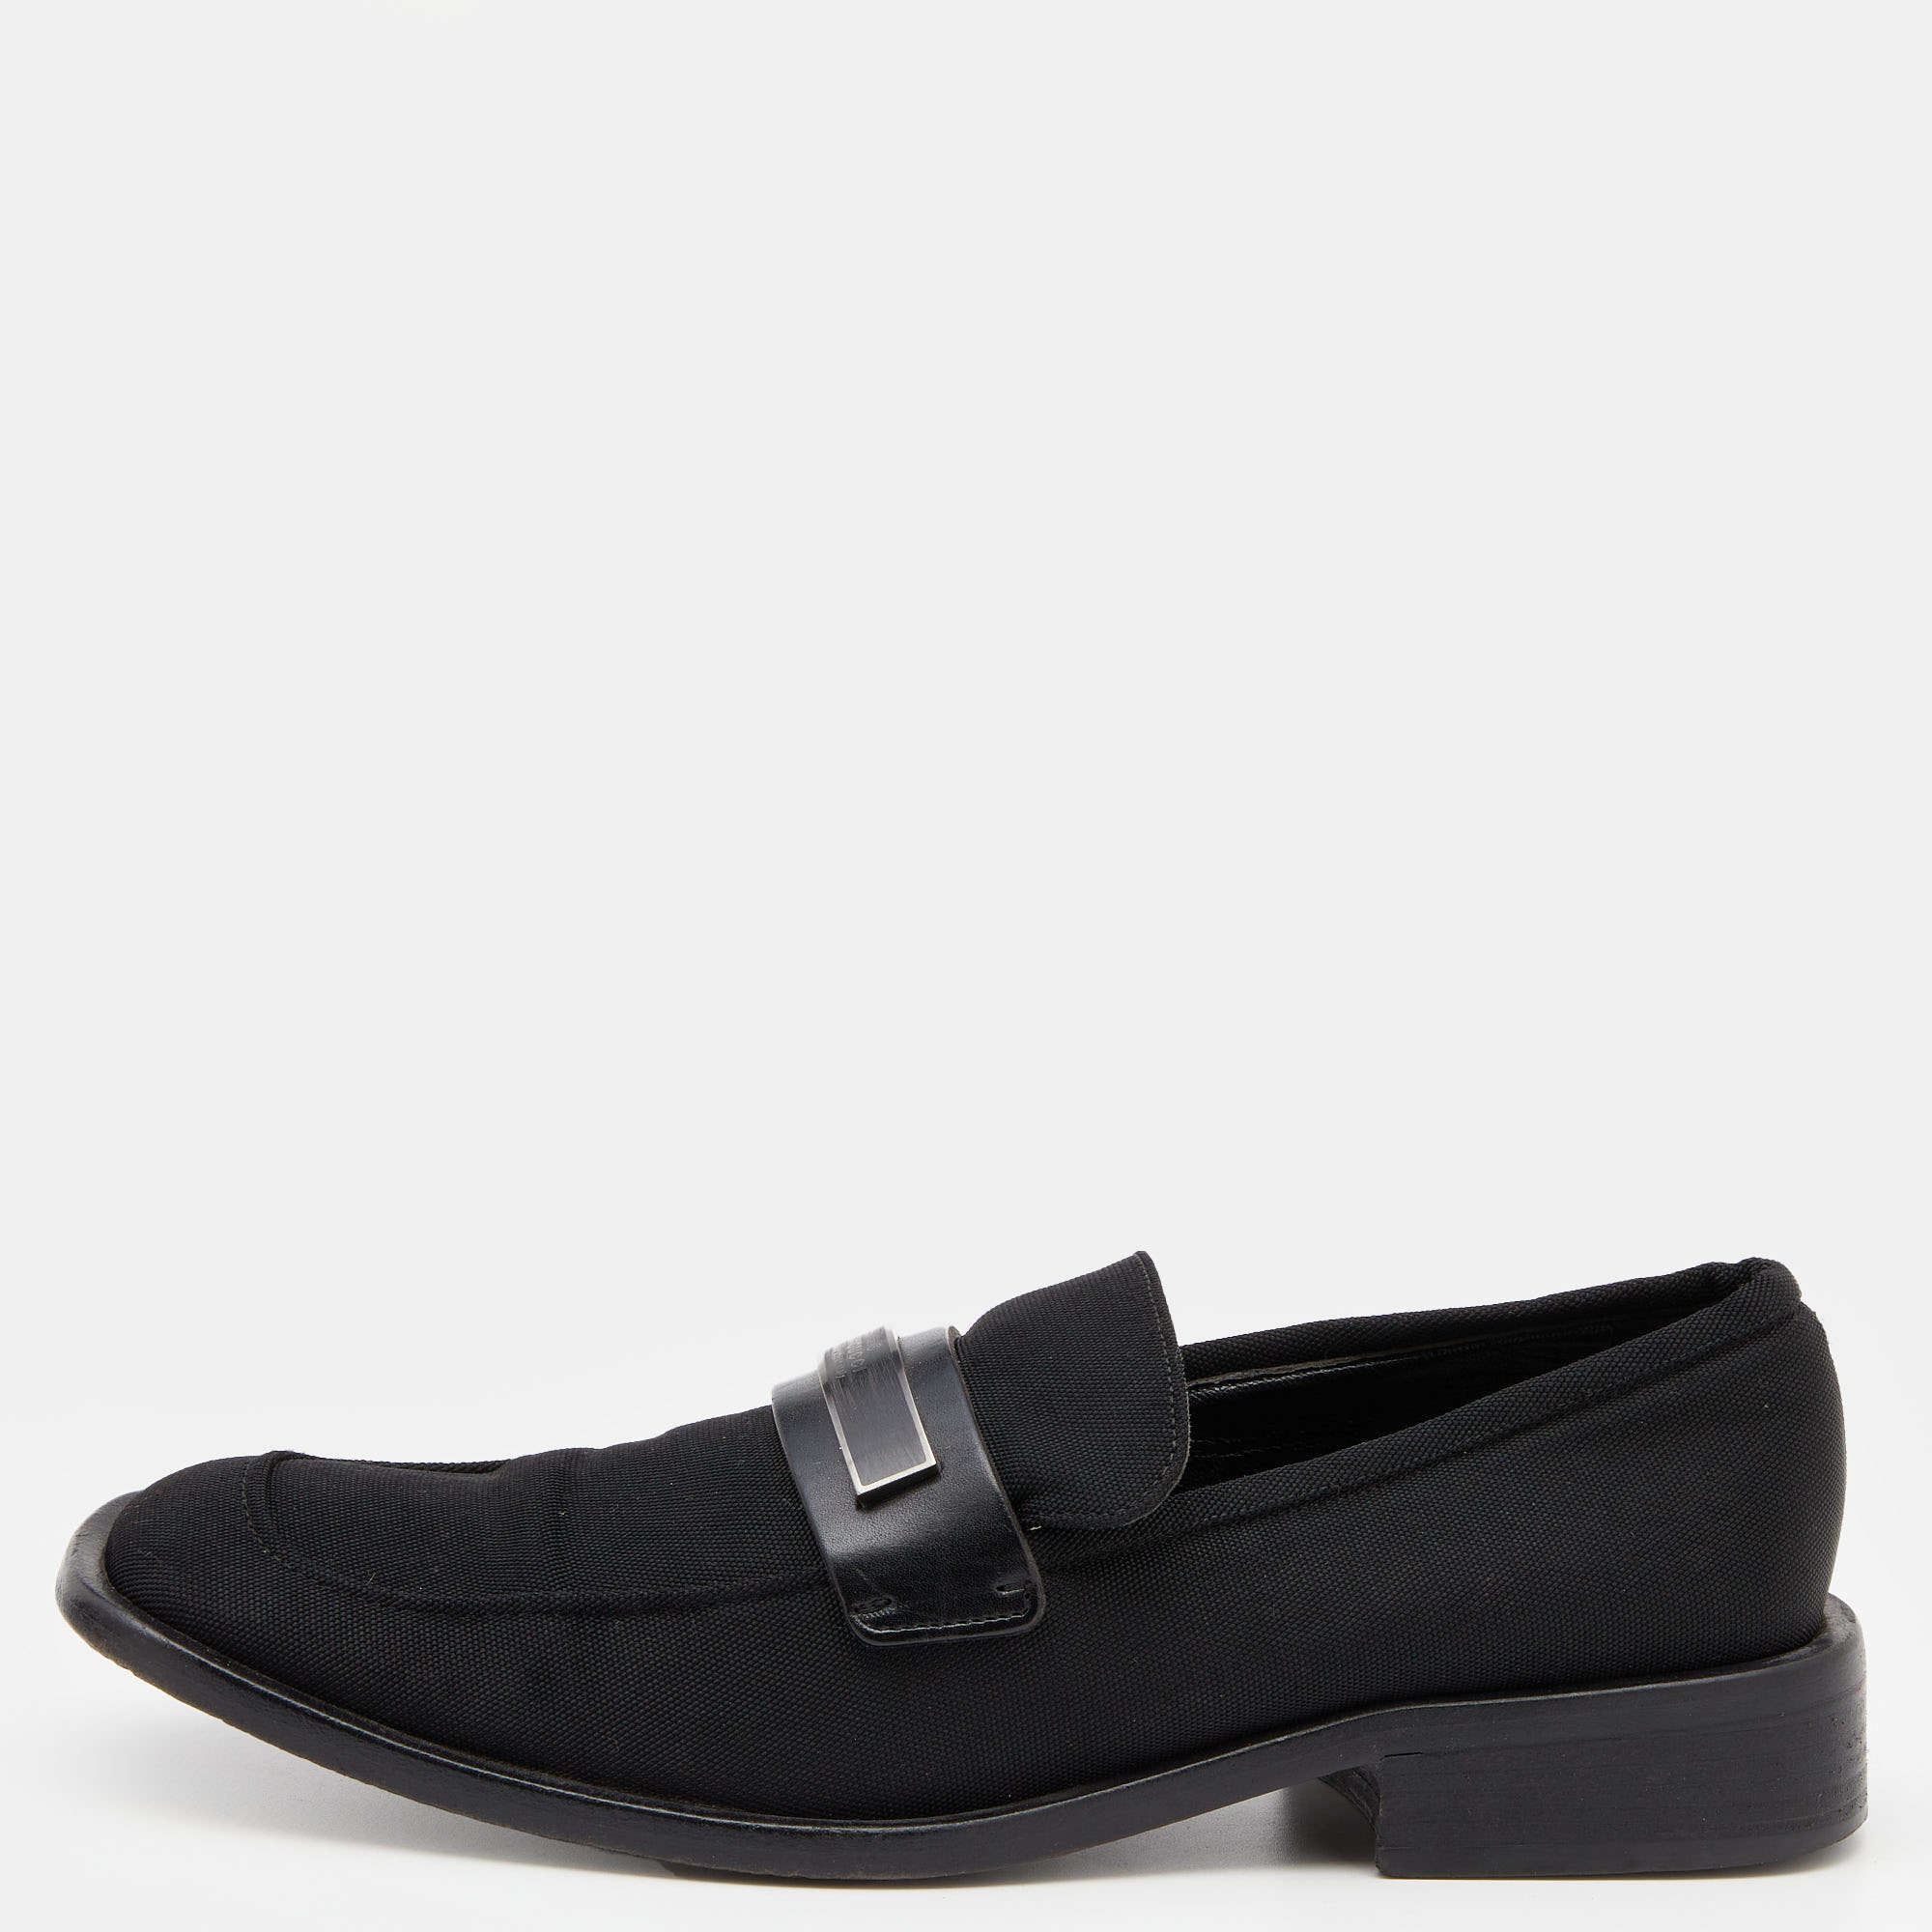 Gucci Black Canvas Slip On Loafers Size 37.5